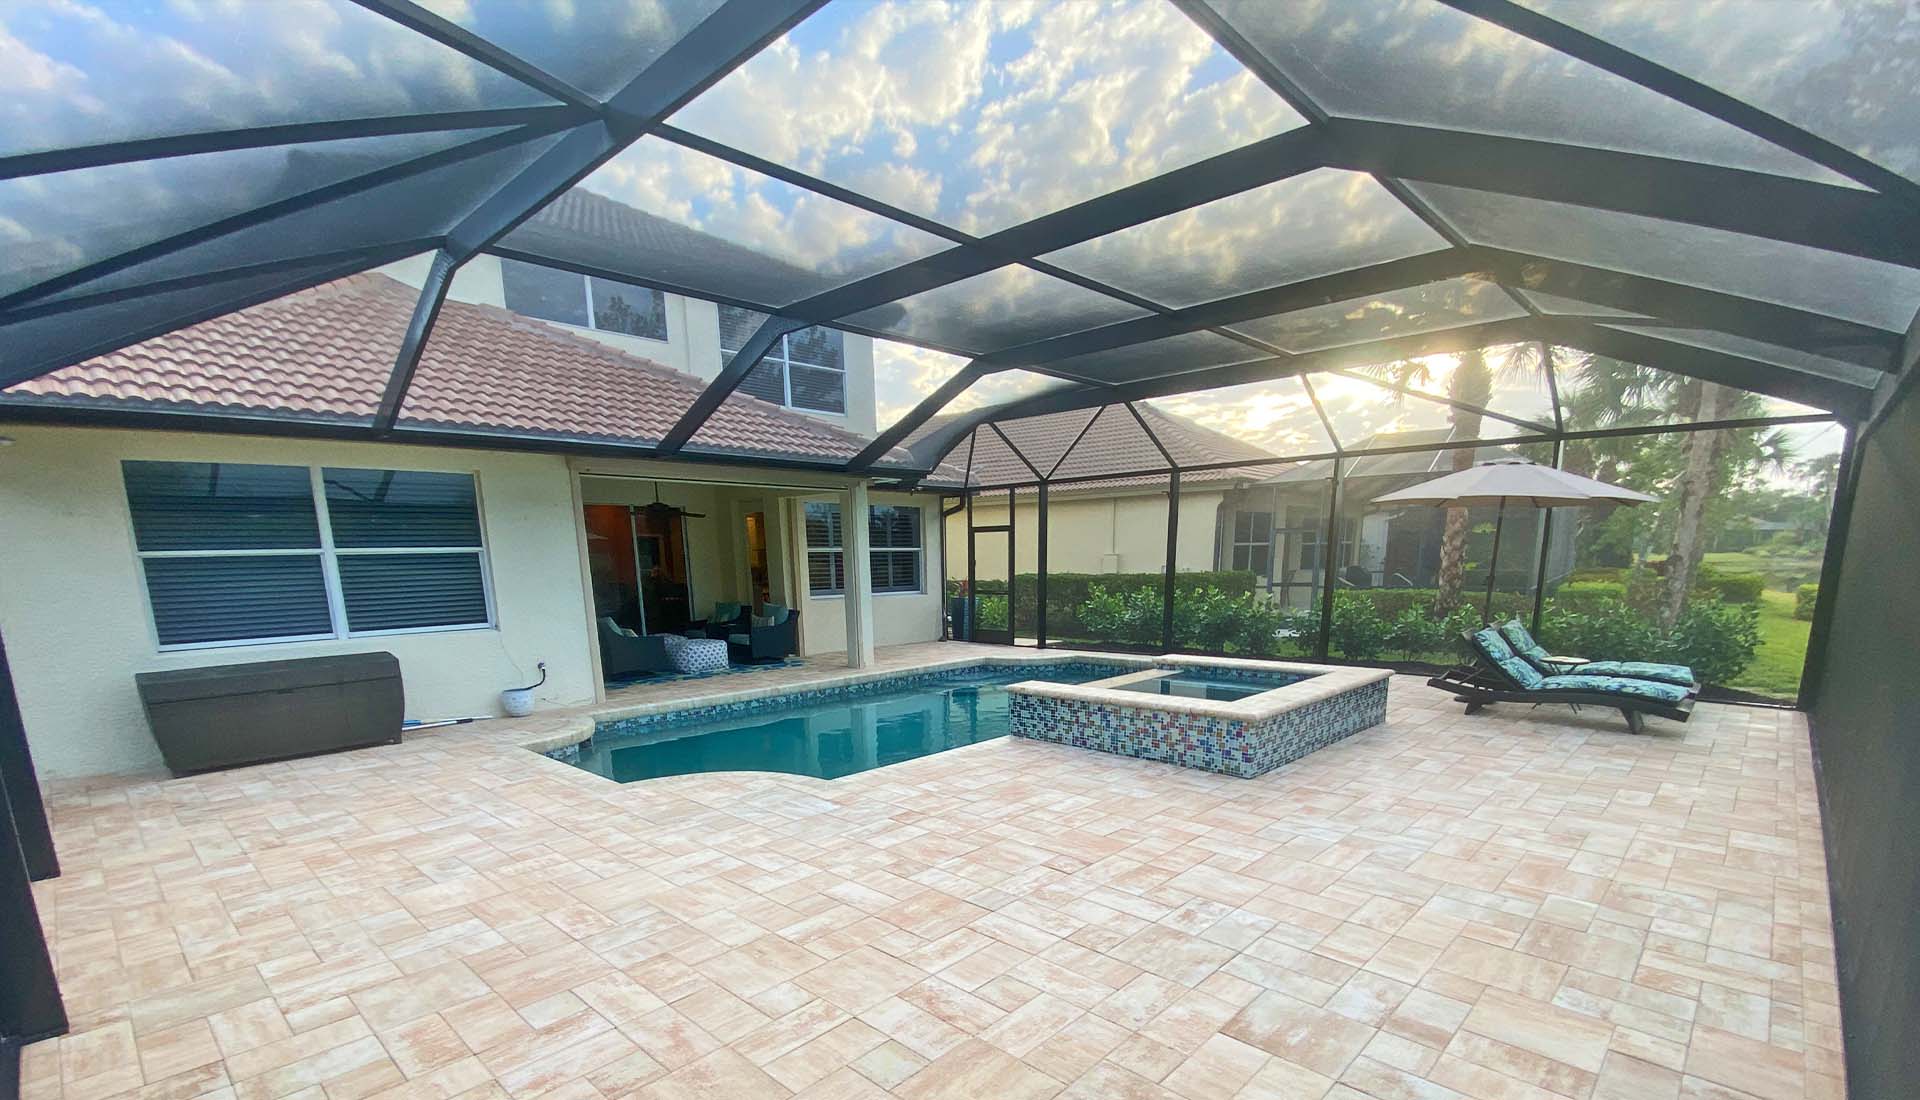 7 - Photo of Cement Pavers, glass tiles and screen enclosure - Pool and Deck Concepts, Naples, FL